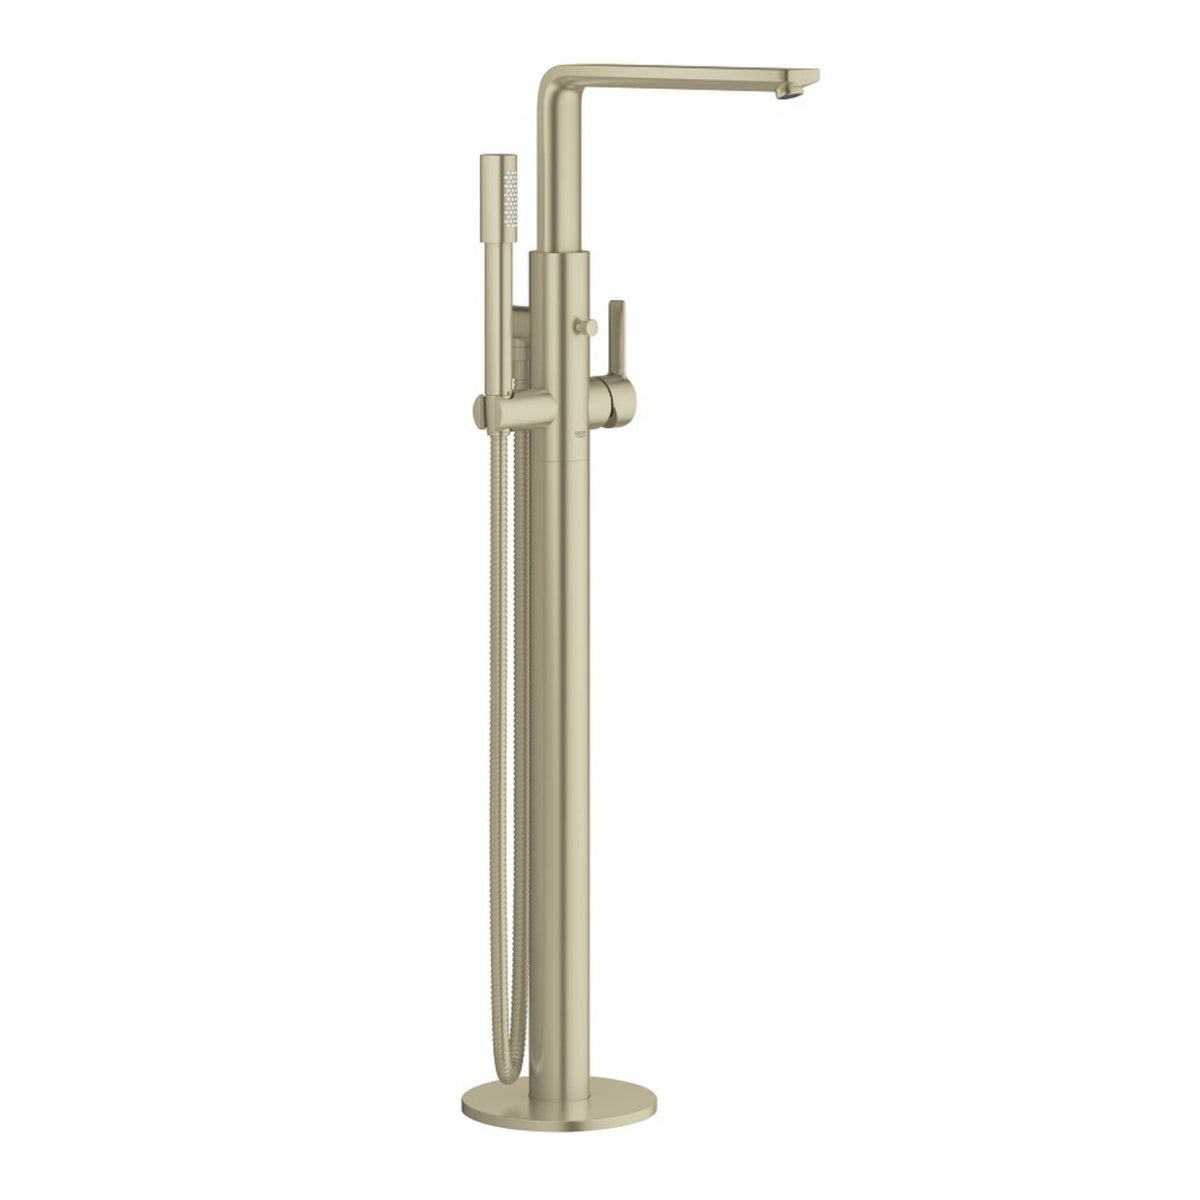 LINEARE FLOOR STANDING TUB FAUCET